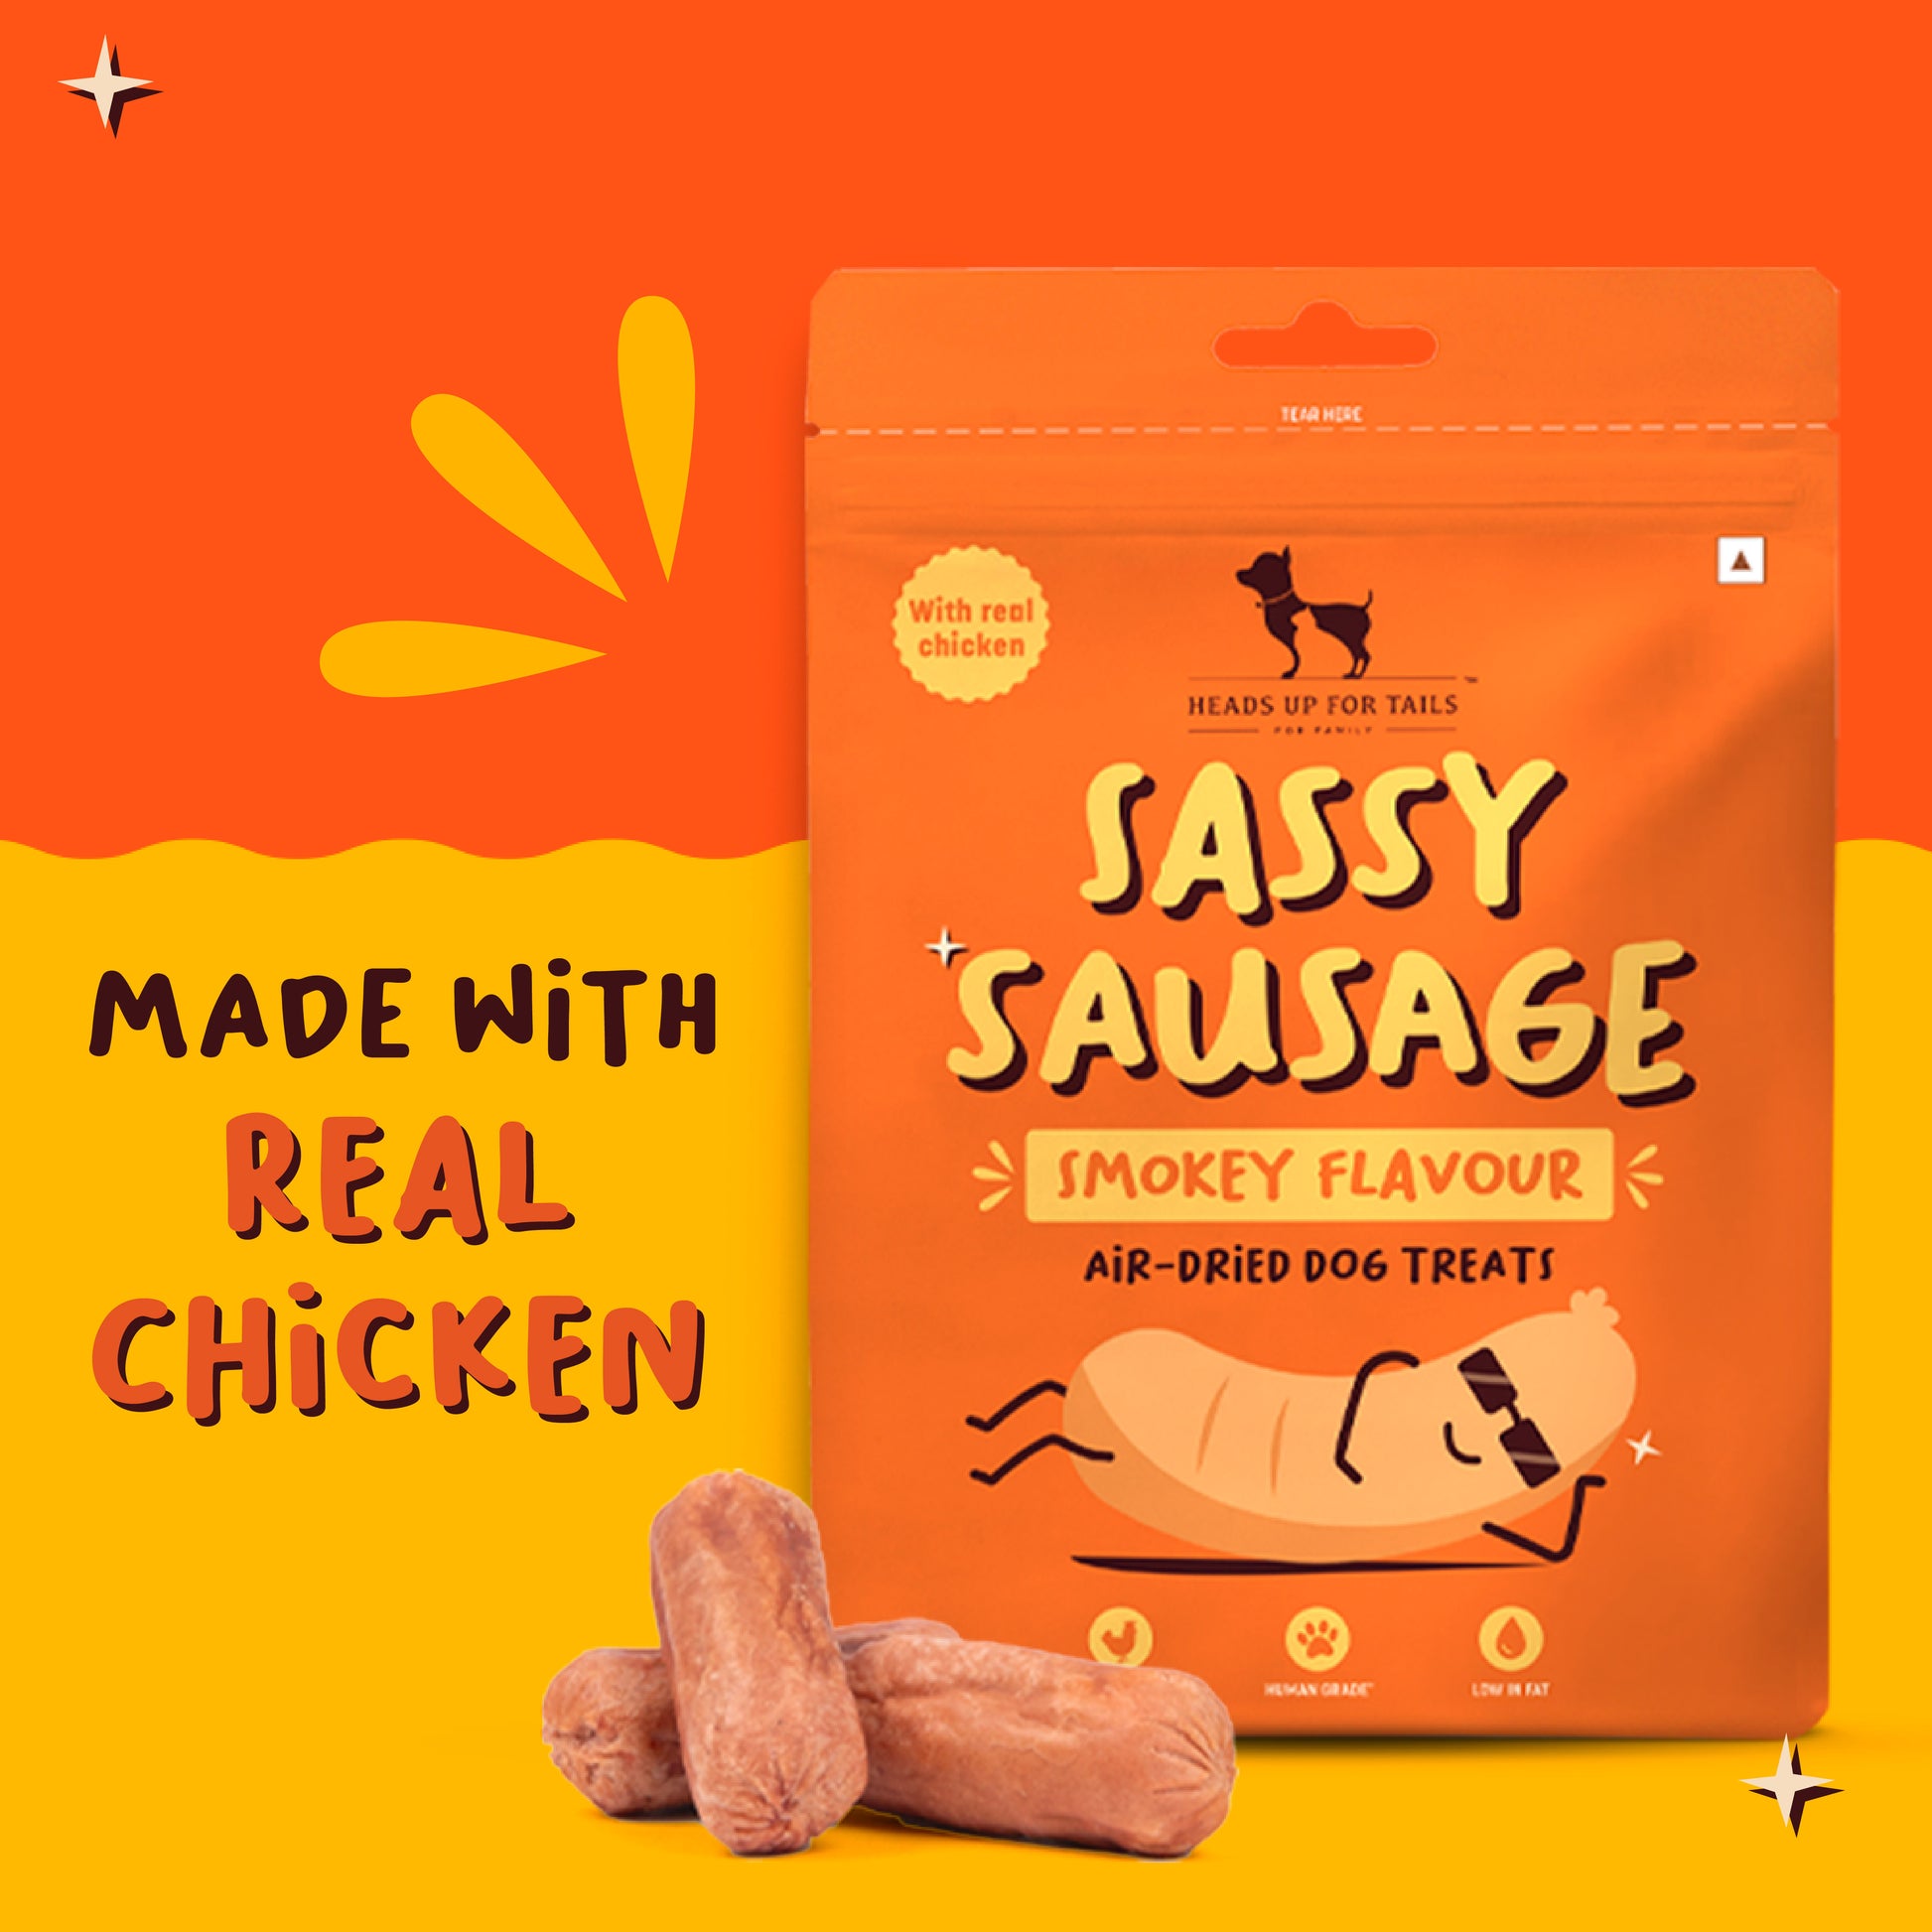 HUFT Sassy Sausage Smokey With Real Chicken Air-Dried Dog Treats - 100 g_02